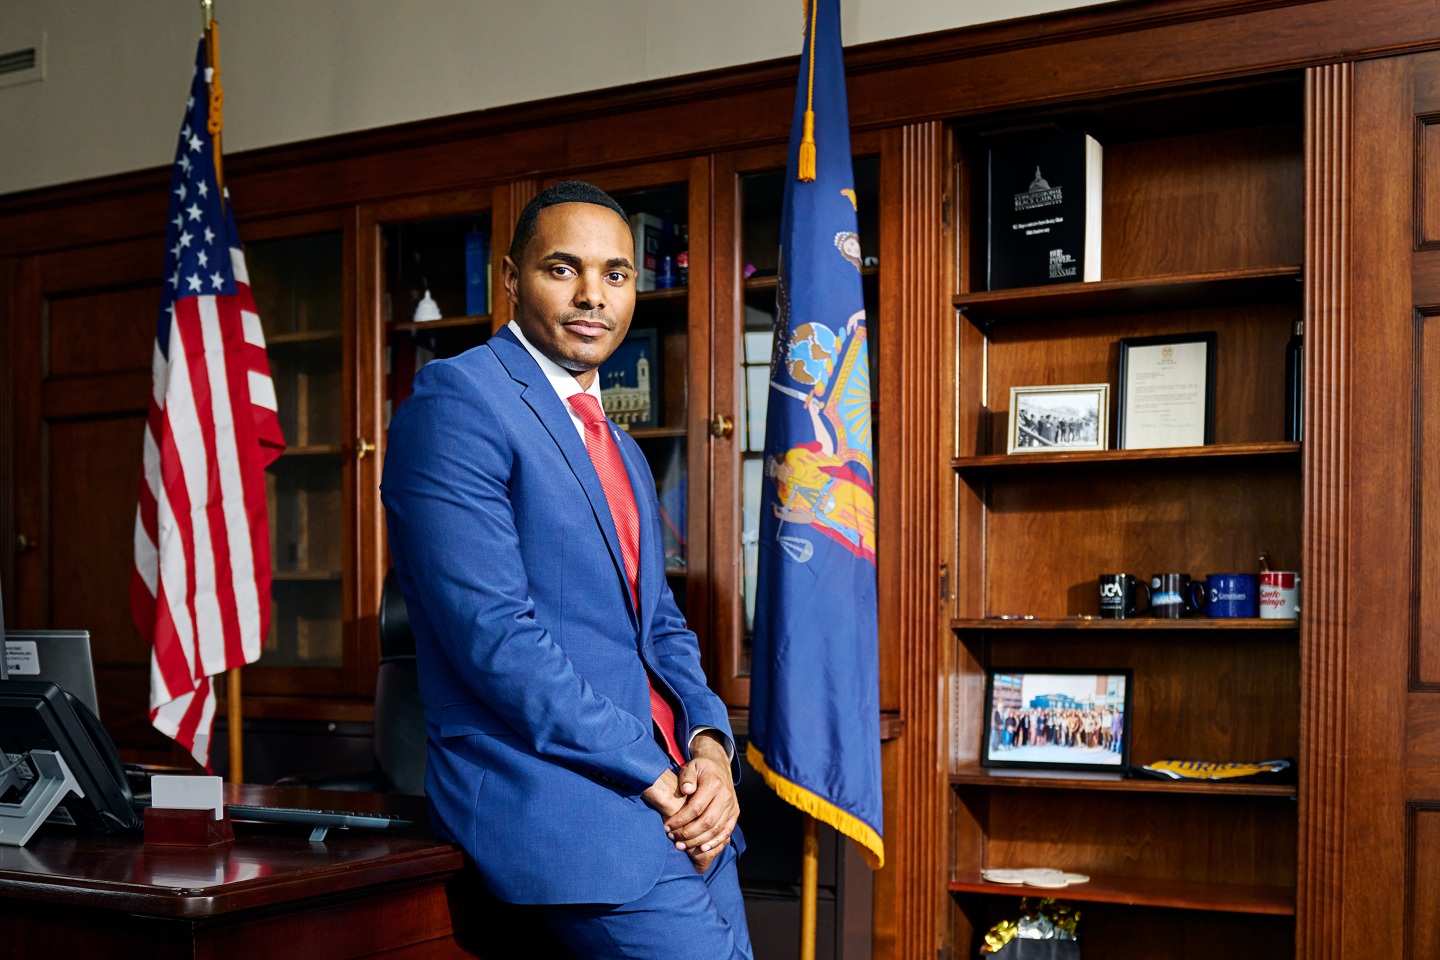 NY Rep. Ritchie Torres photographed in his office in the Longworth House building on Jan. 12, 2022 in Washington D.C.